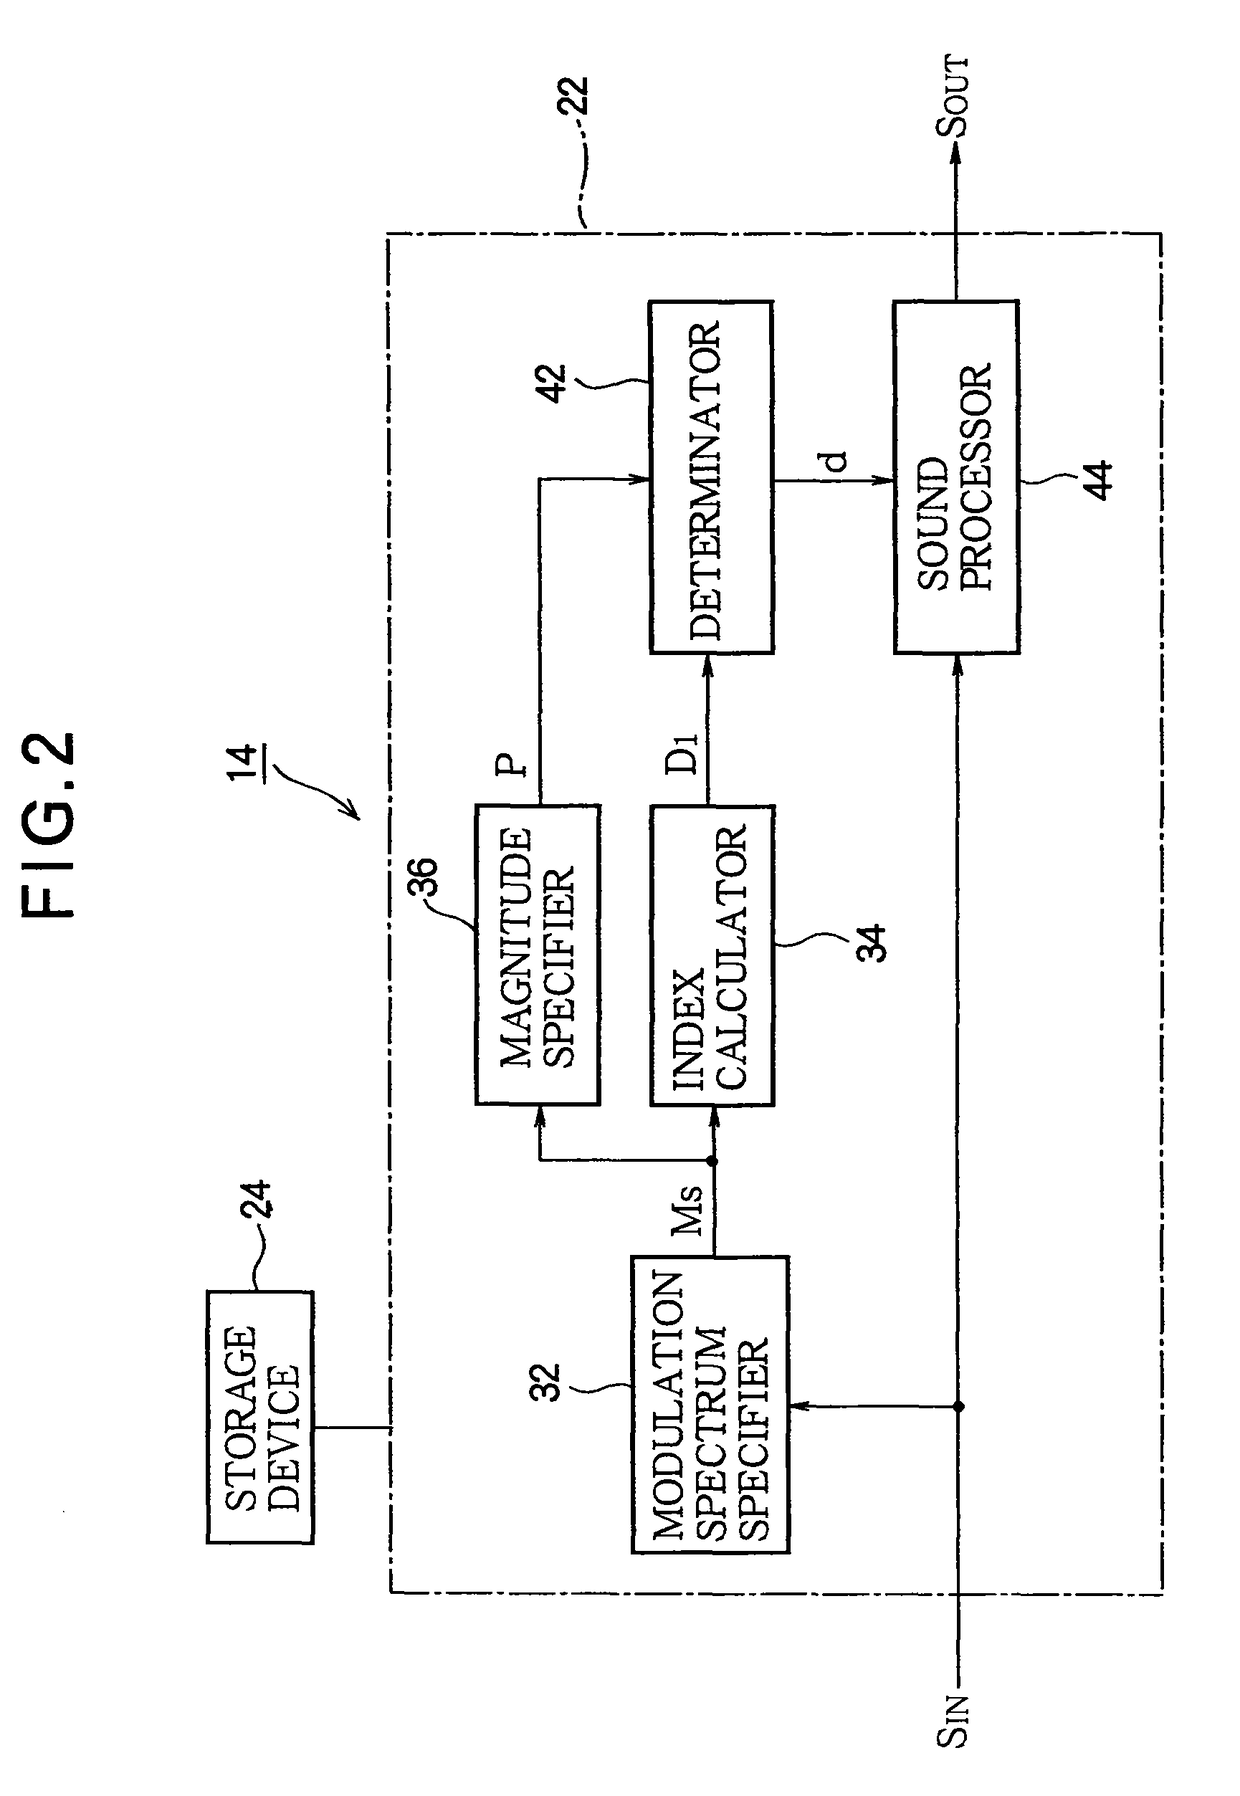 Sound processing device and program